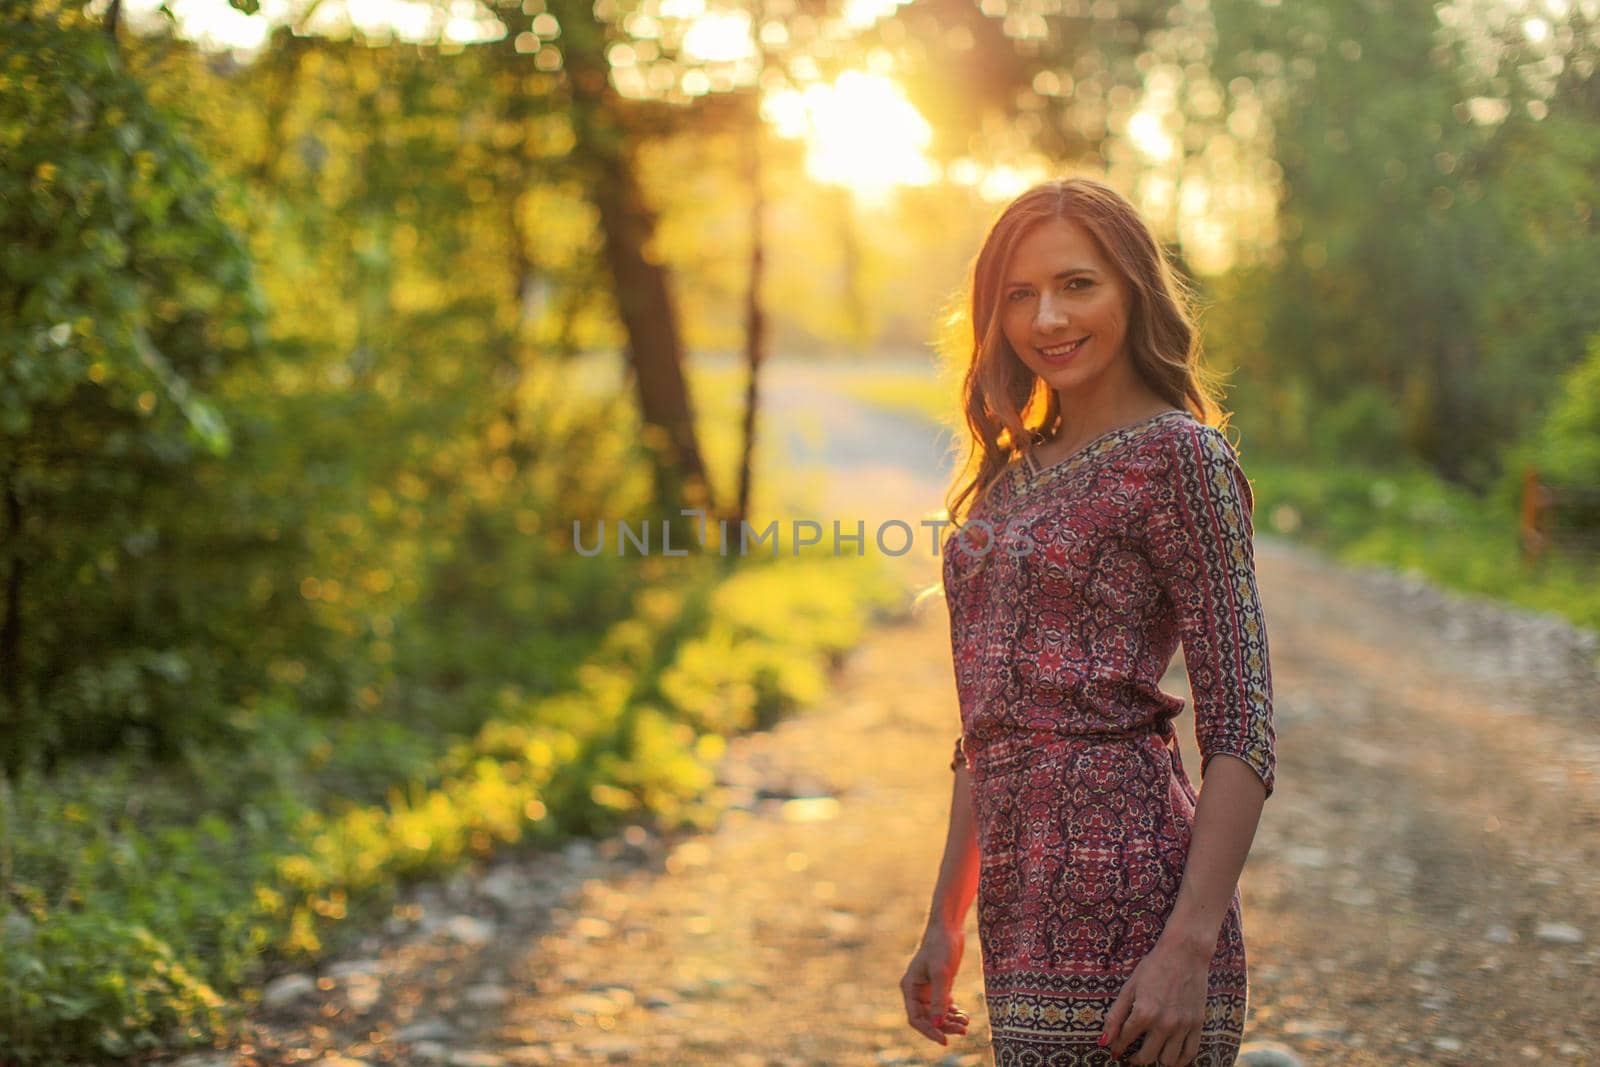 Young woman wearing dress, walking on forest path with golden sunset light in background. by Ivanko